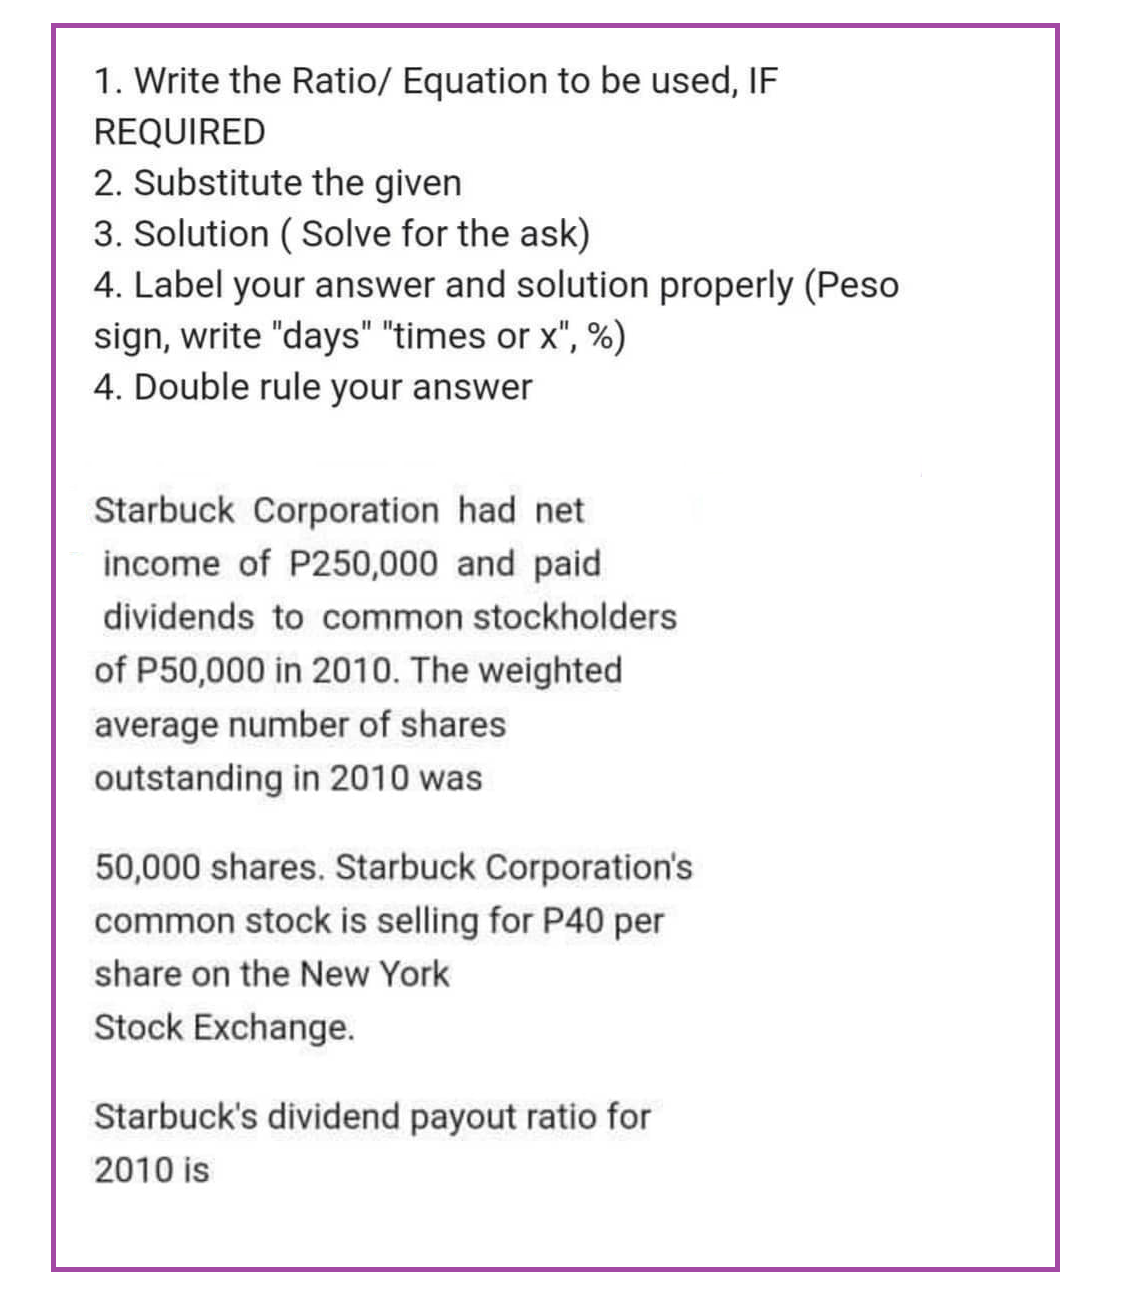 1. Write the Ratio/ Equation to be used, IF
REQUIRED
2. Substitute the given
3. Solution (Solve for the ask)
4. Label your answer and solution properly (Peso
sign, write "days" "times or x", %)
4. Double rule your answer
Starbuck Corporation had net
income of P250,000 and paid
dividends to common stockholders
of P50,000 in 2010. The weighted
average number of shares
outstanding in 2010 was
50,000 shares. Starbuck Corporation's
common stock is selling for P40 per
share on the New York
Stock Exchange.
Starbuck's dividend payout ratio for
2010 is